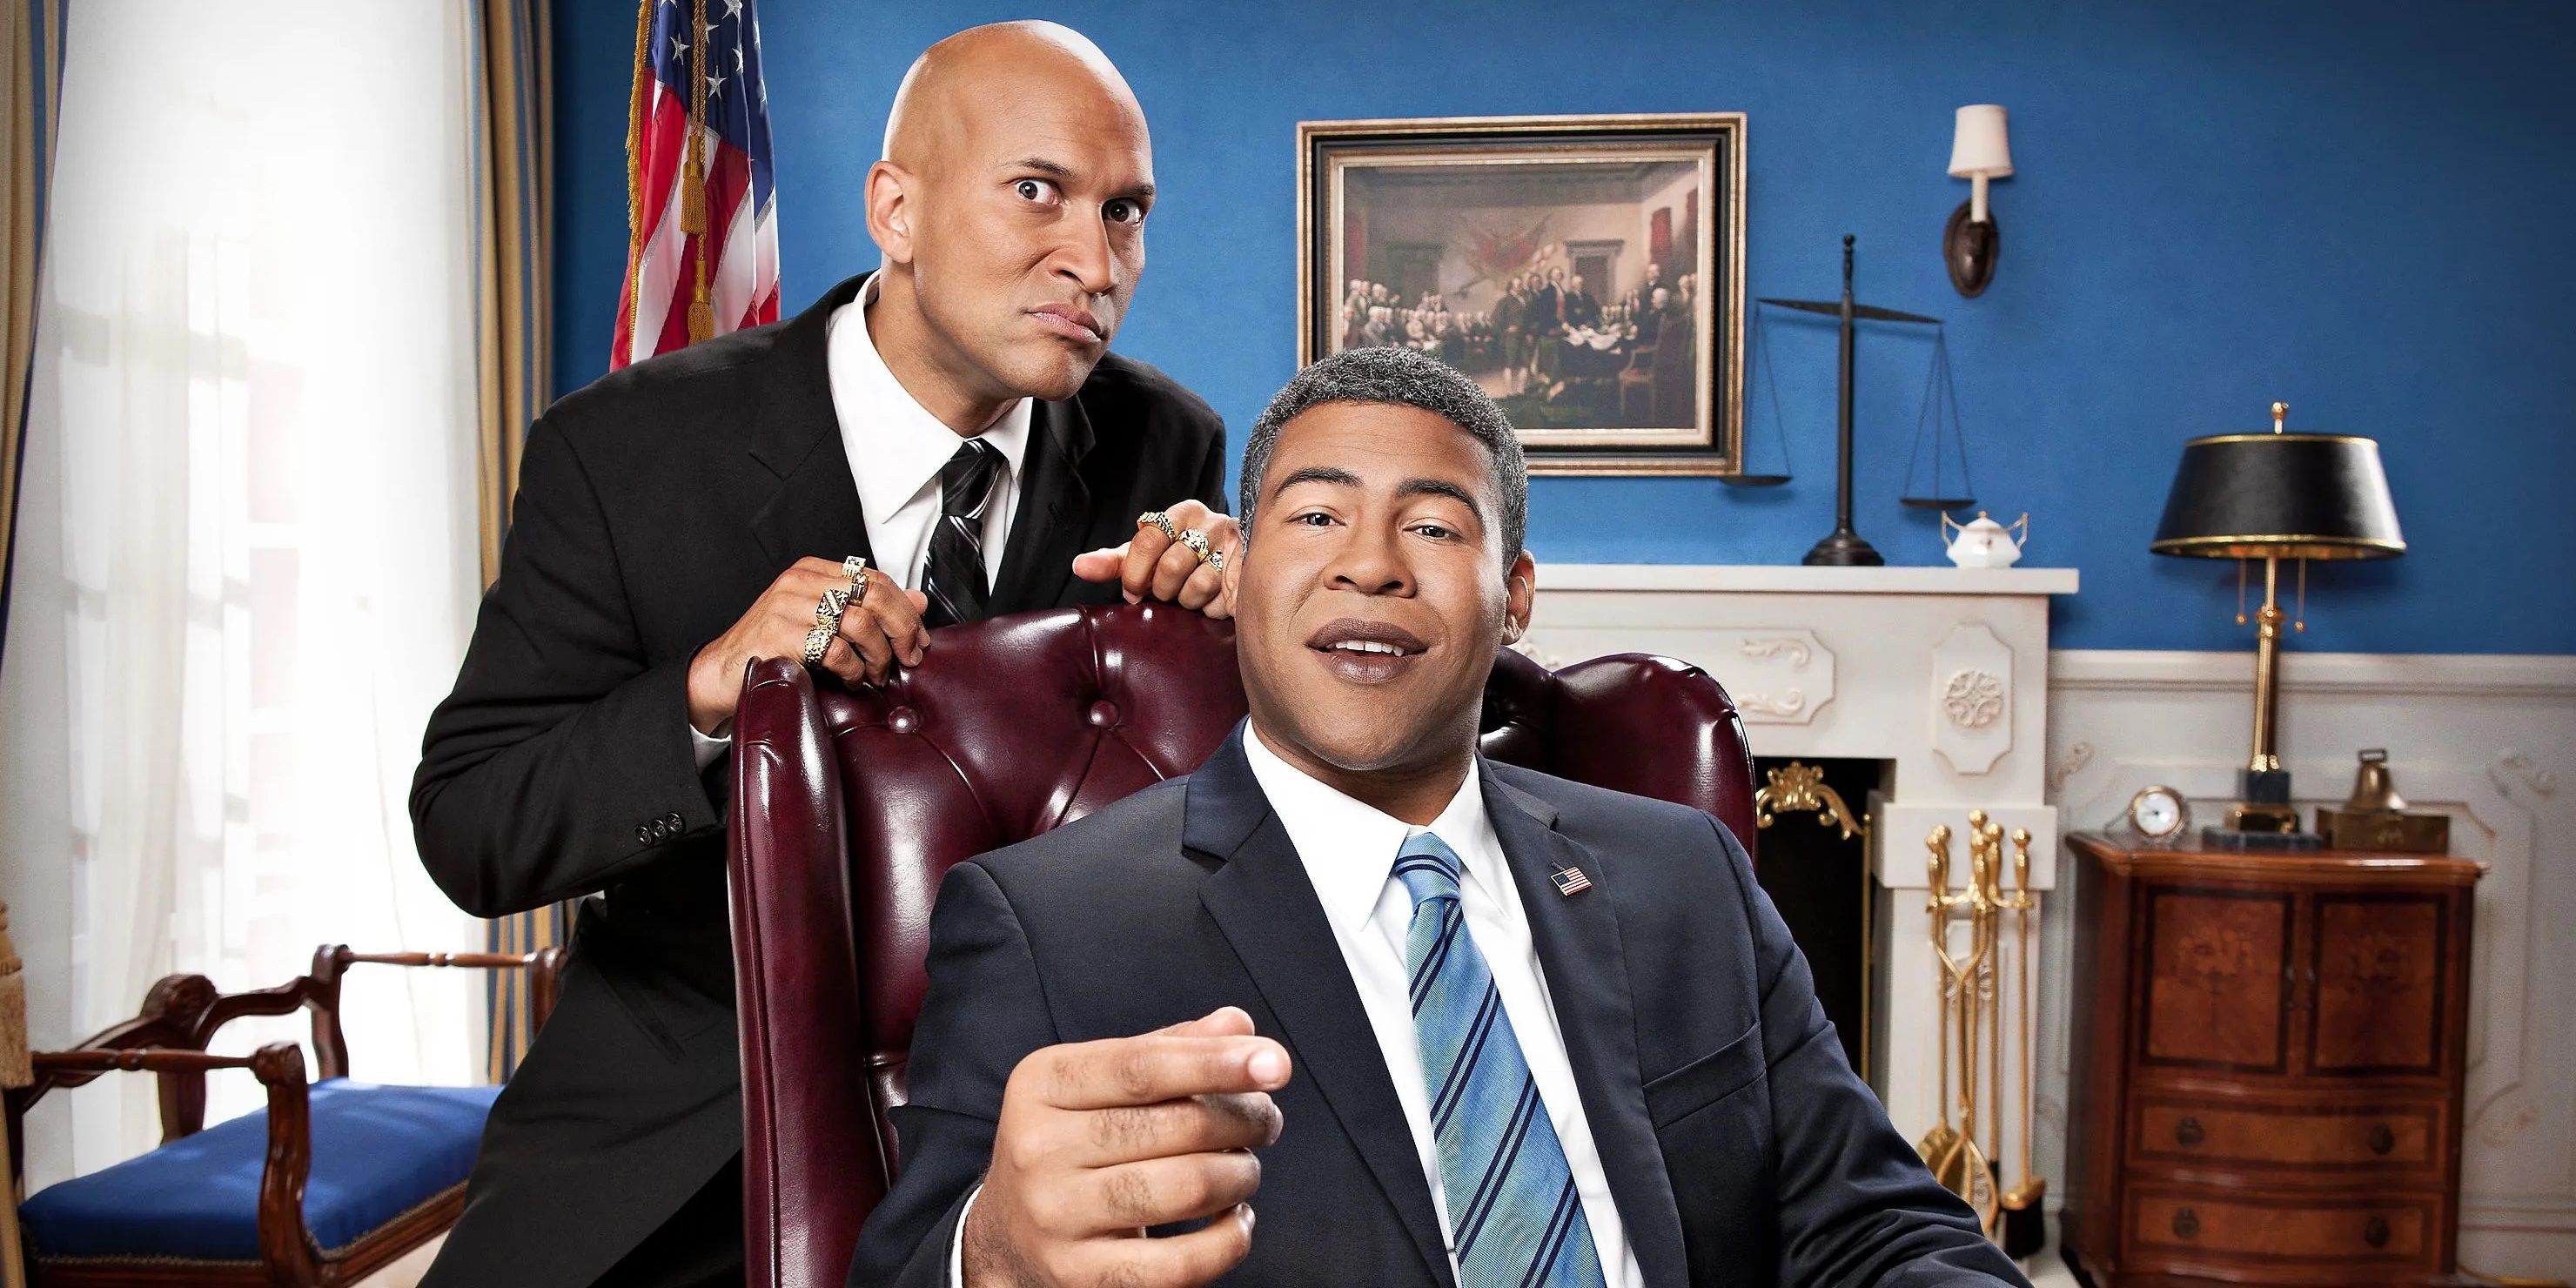 The 10 Funniest Characters From Comedy Central Shows Ranked